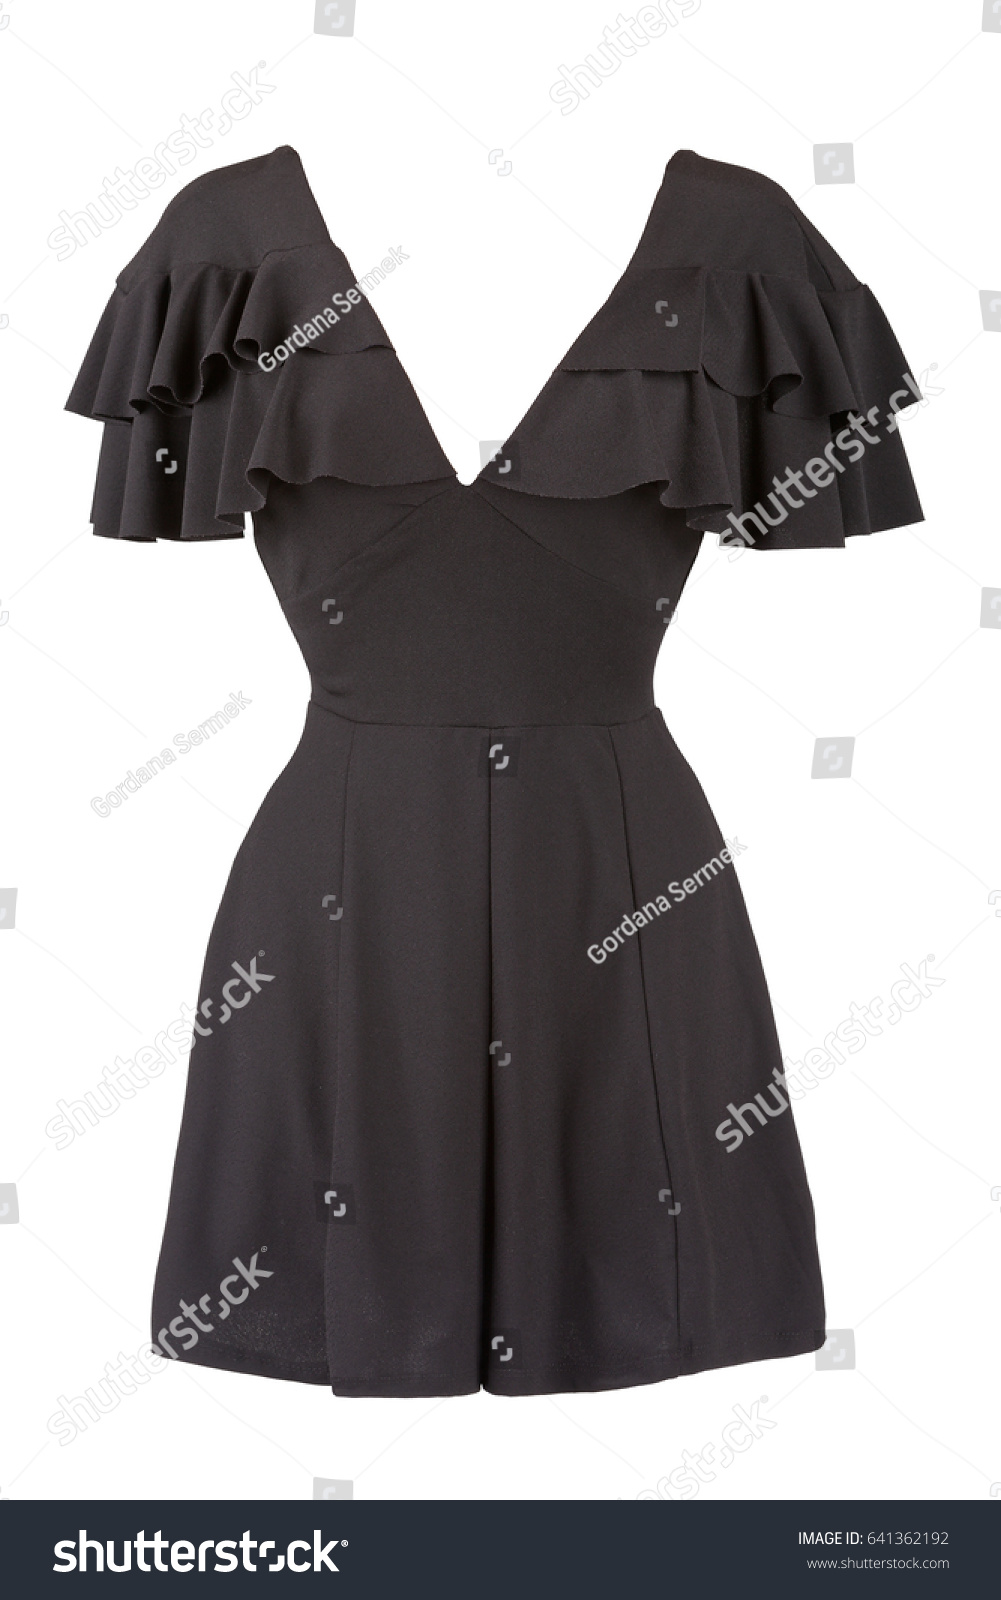 483 Dress butterfly sleeves Images, Stock Photos & Vectors | Shutterstock